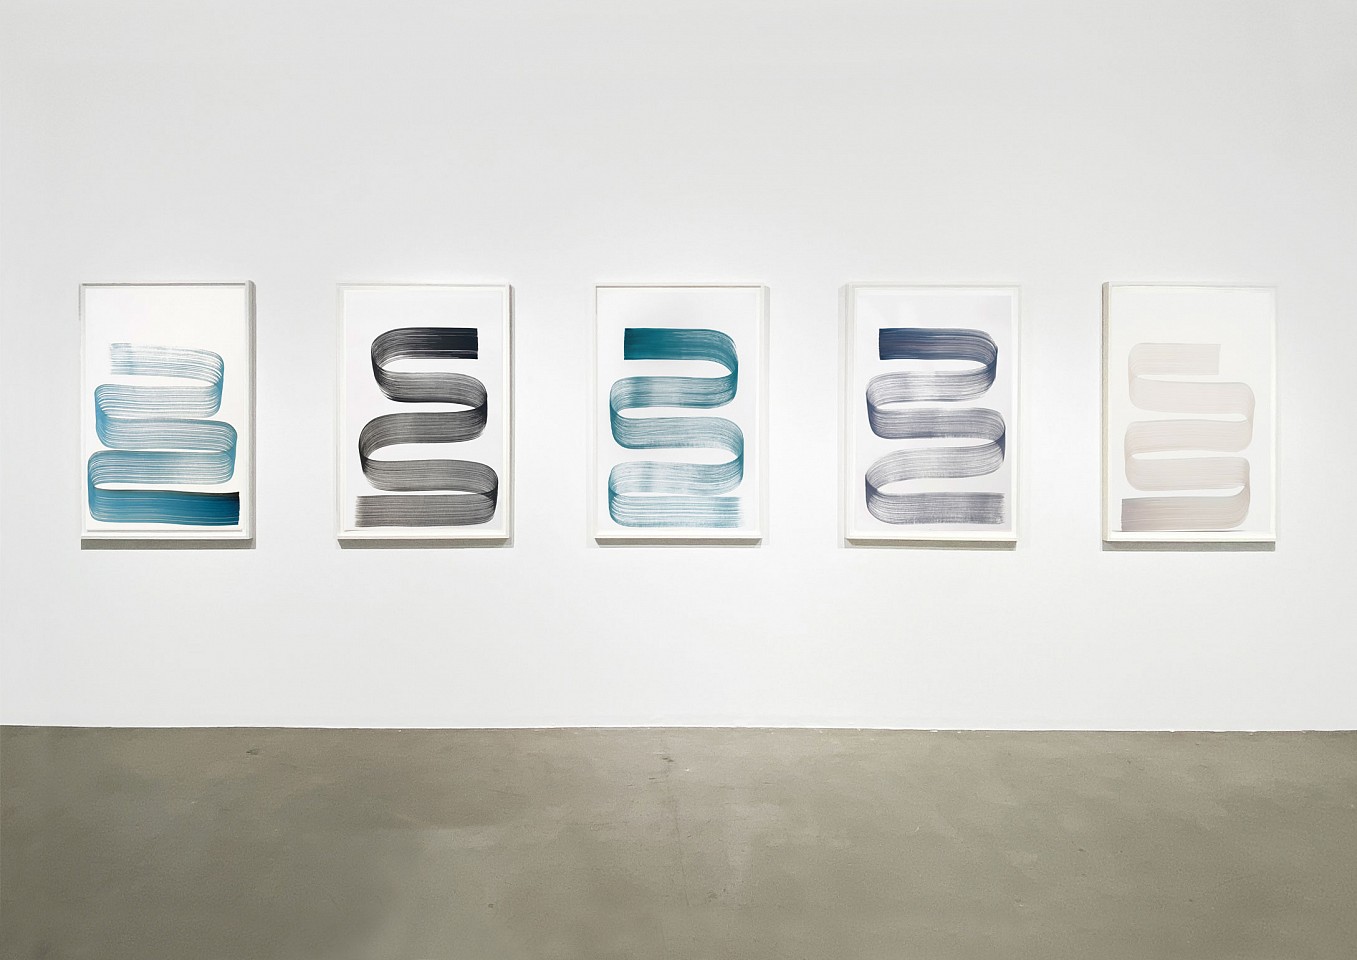 Agnes Barley
Continuous Strokes Installation, 2022
acrylic  on paper, 40 x 30 inches / 47 1/2 x 43 1/2 inches framed each